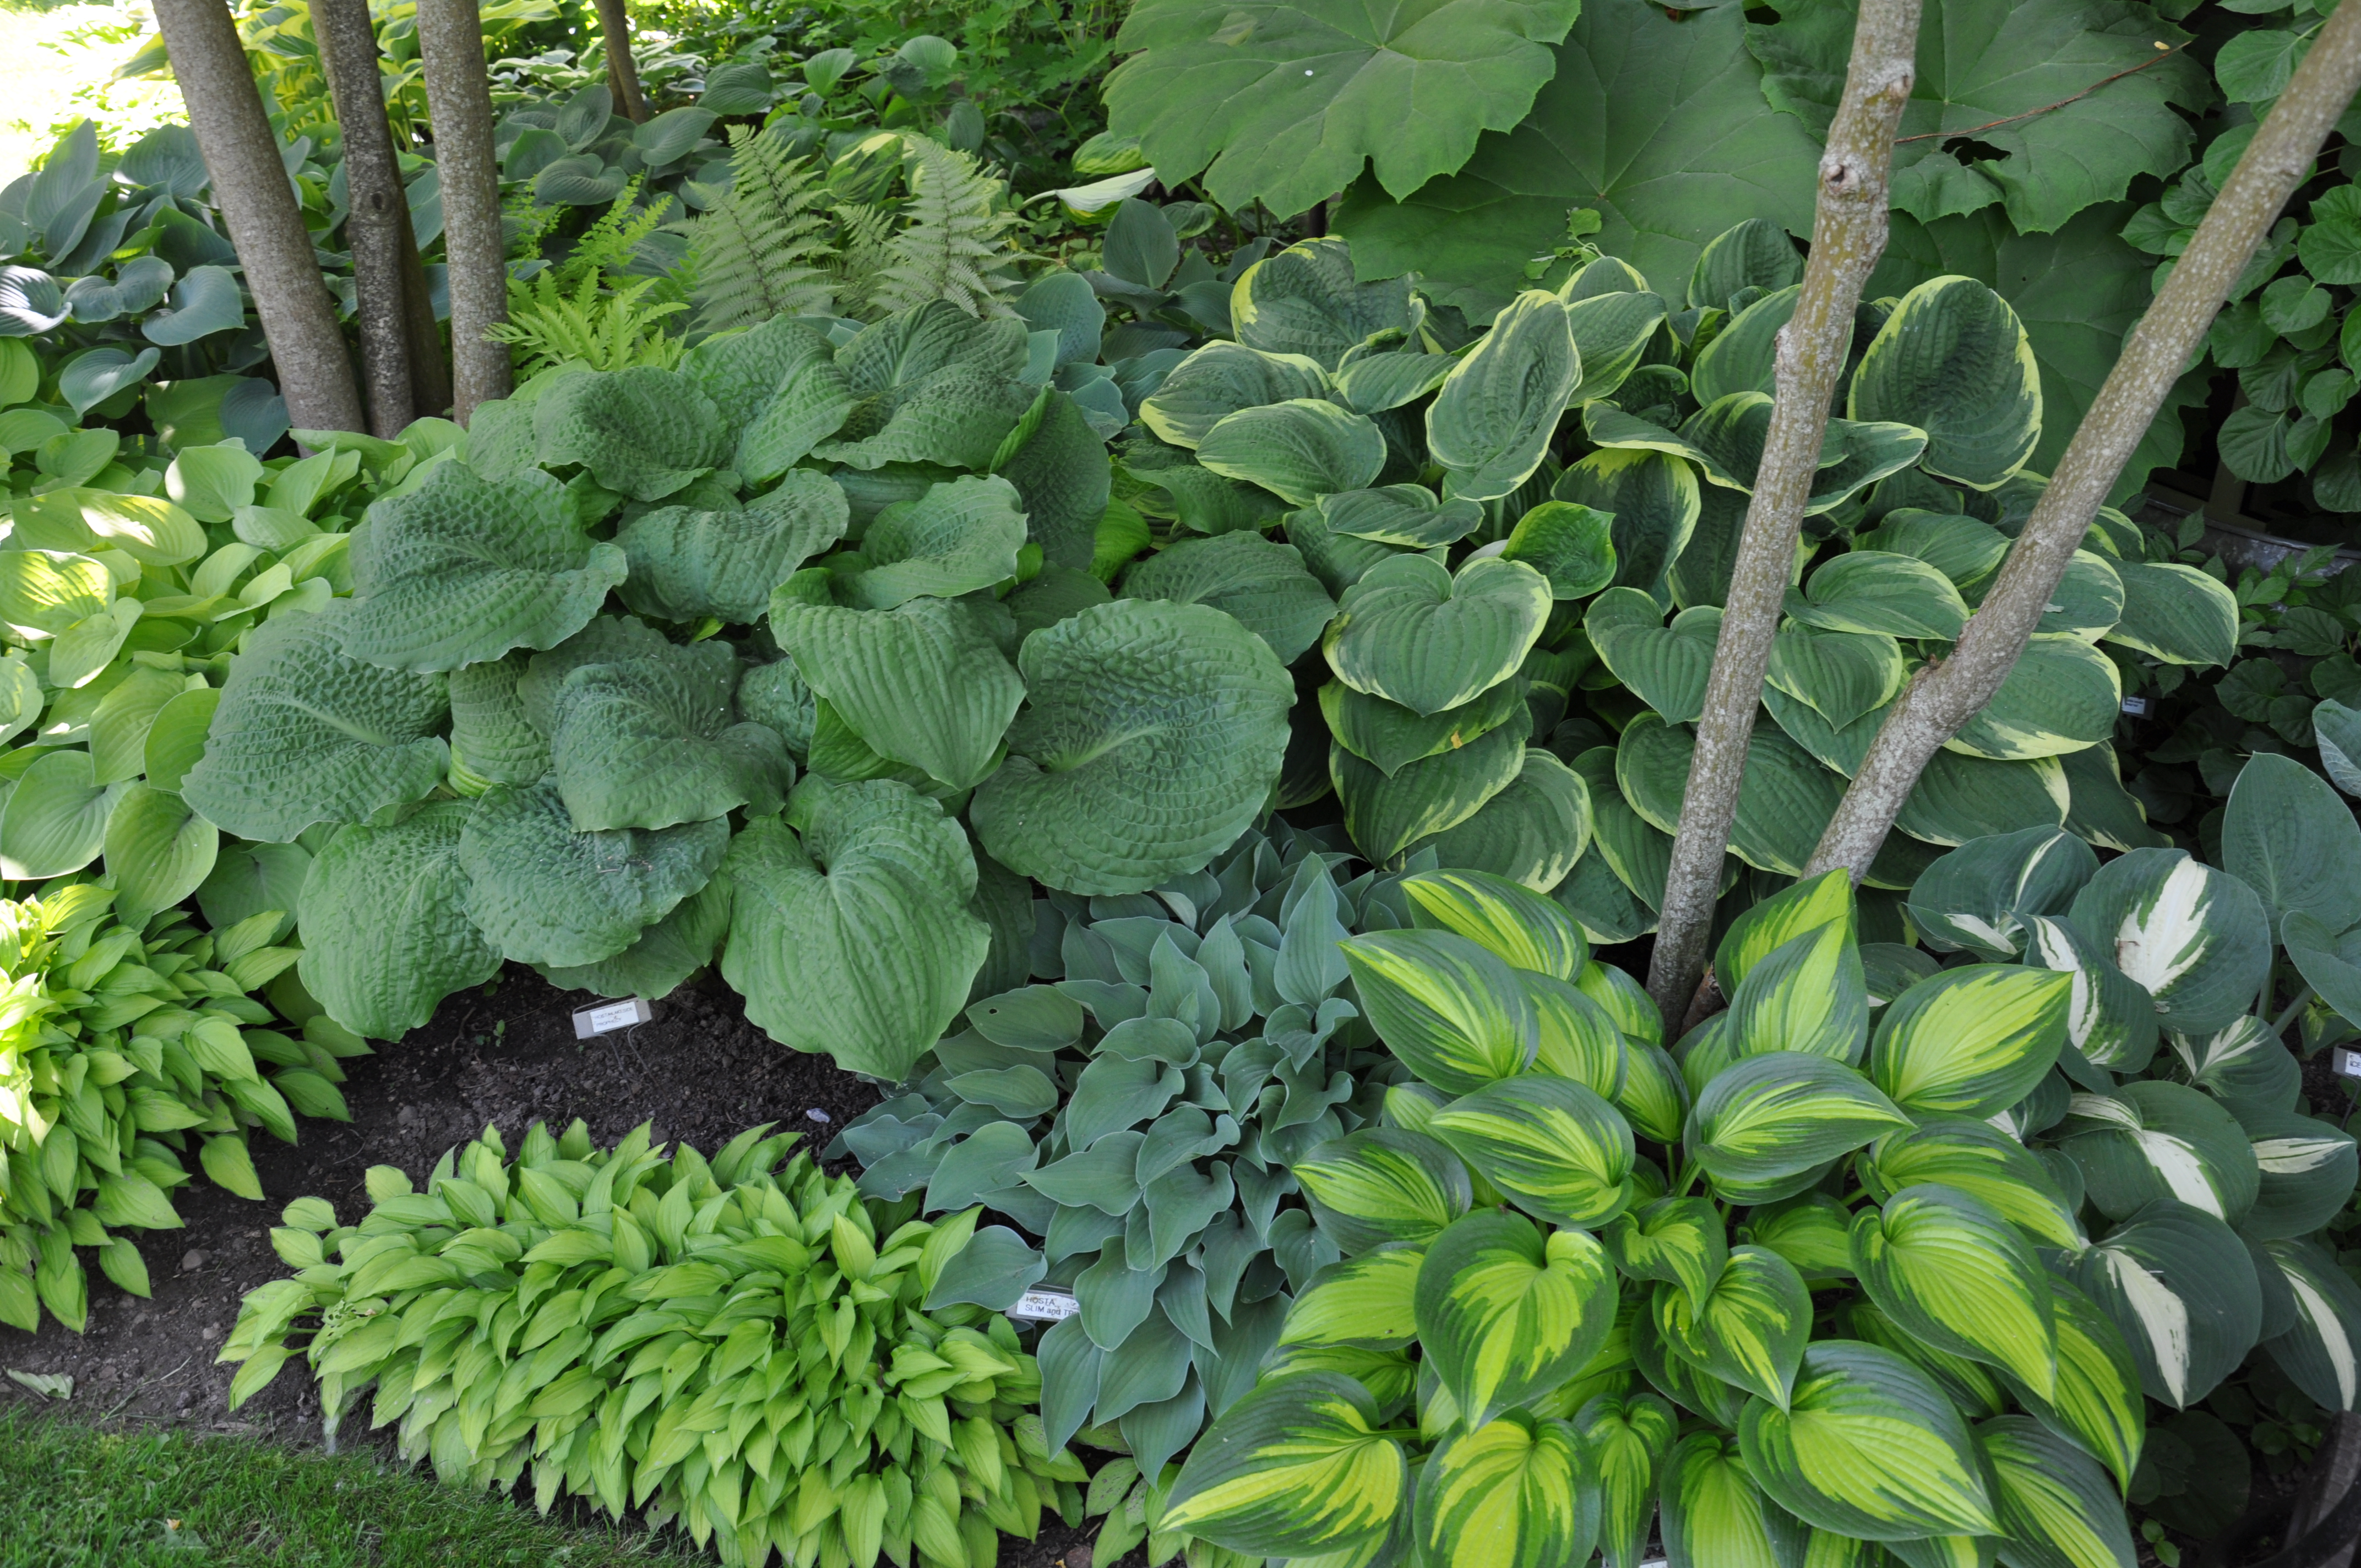 Hostas with different leaf textures